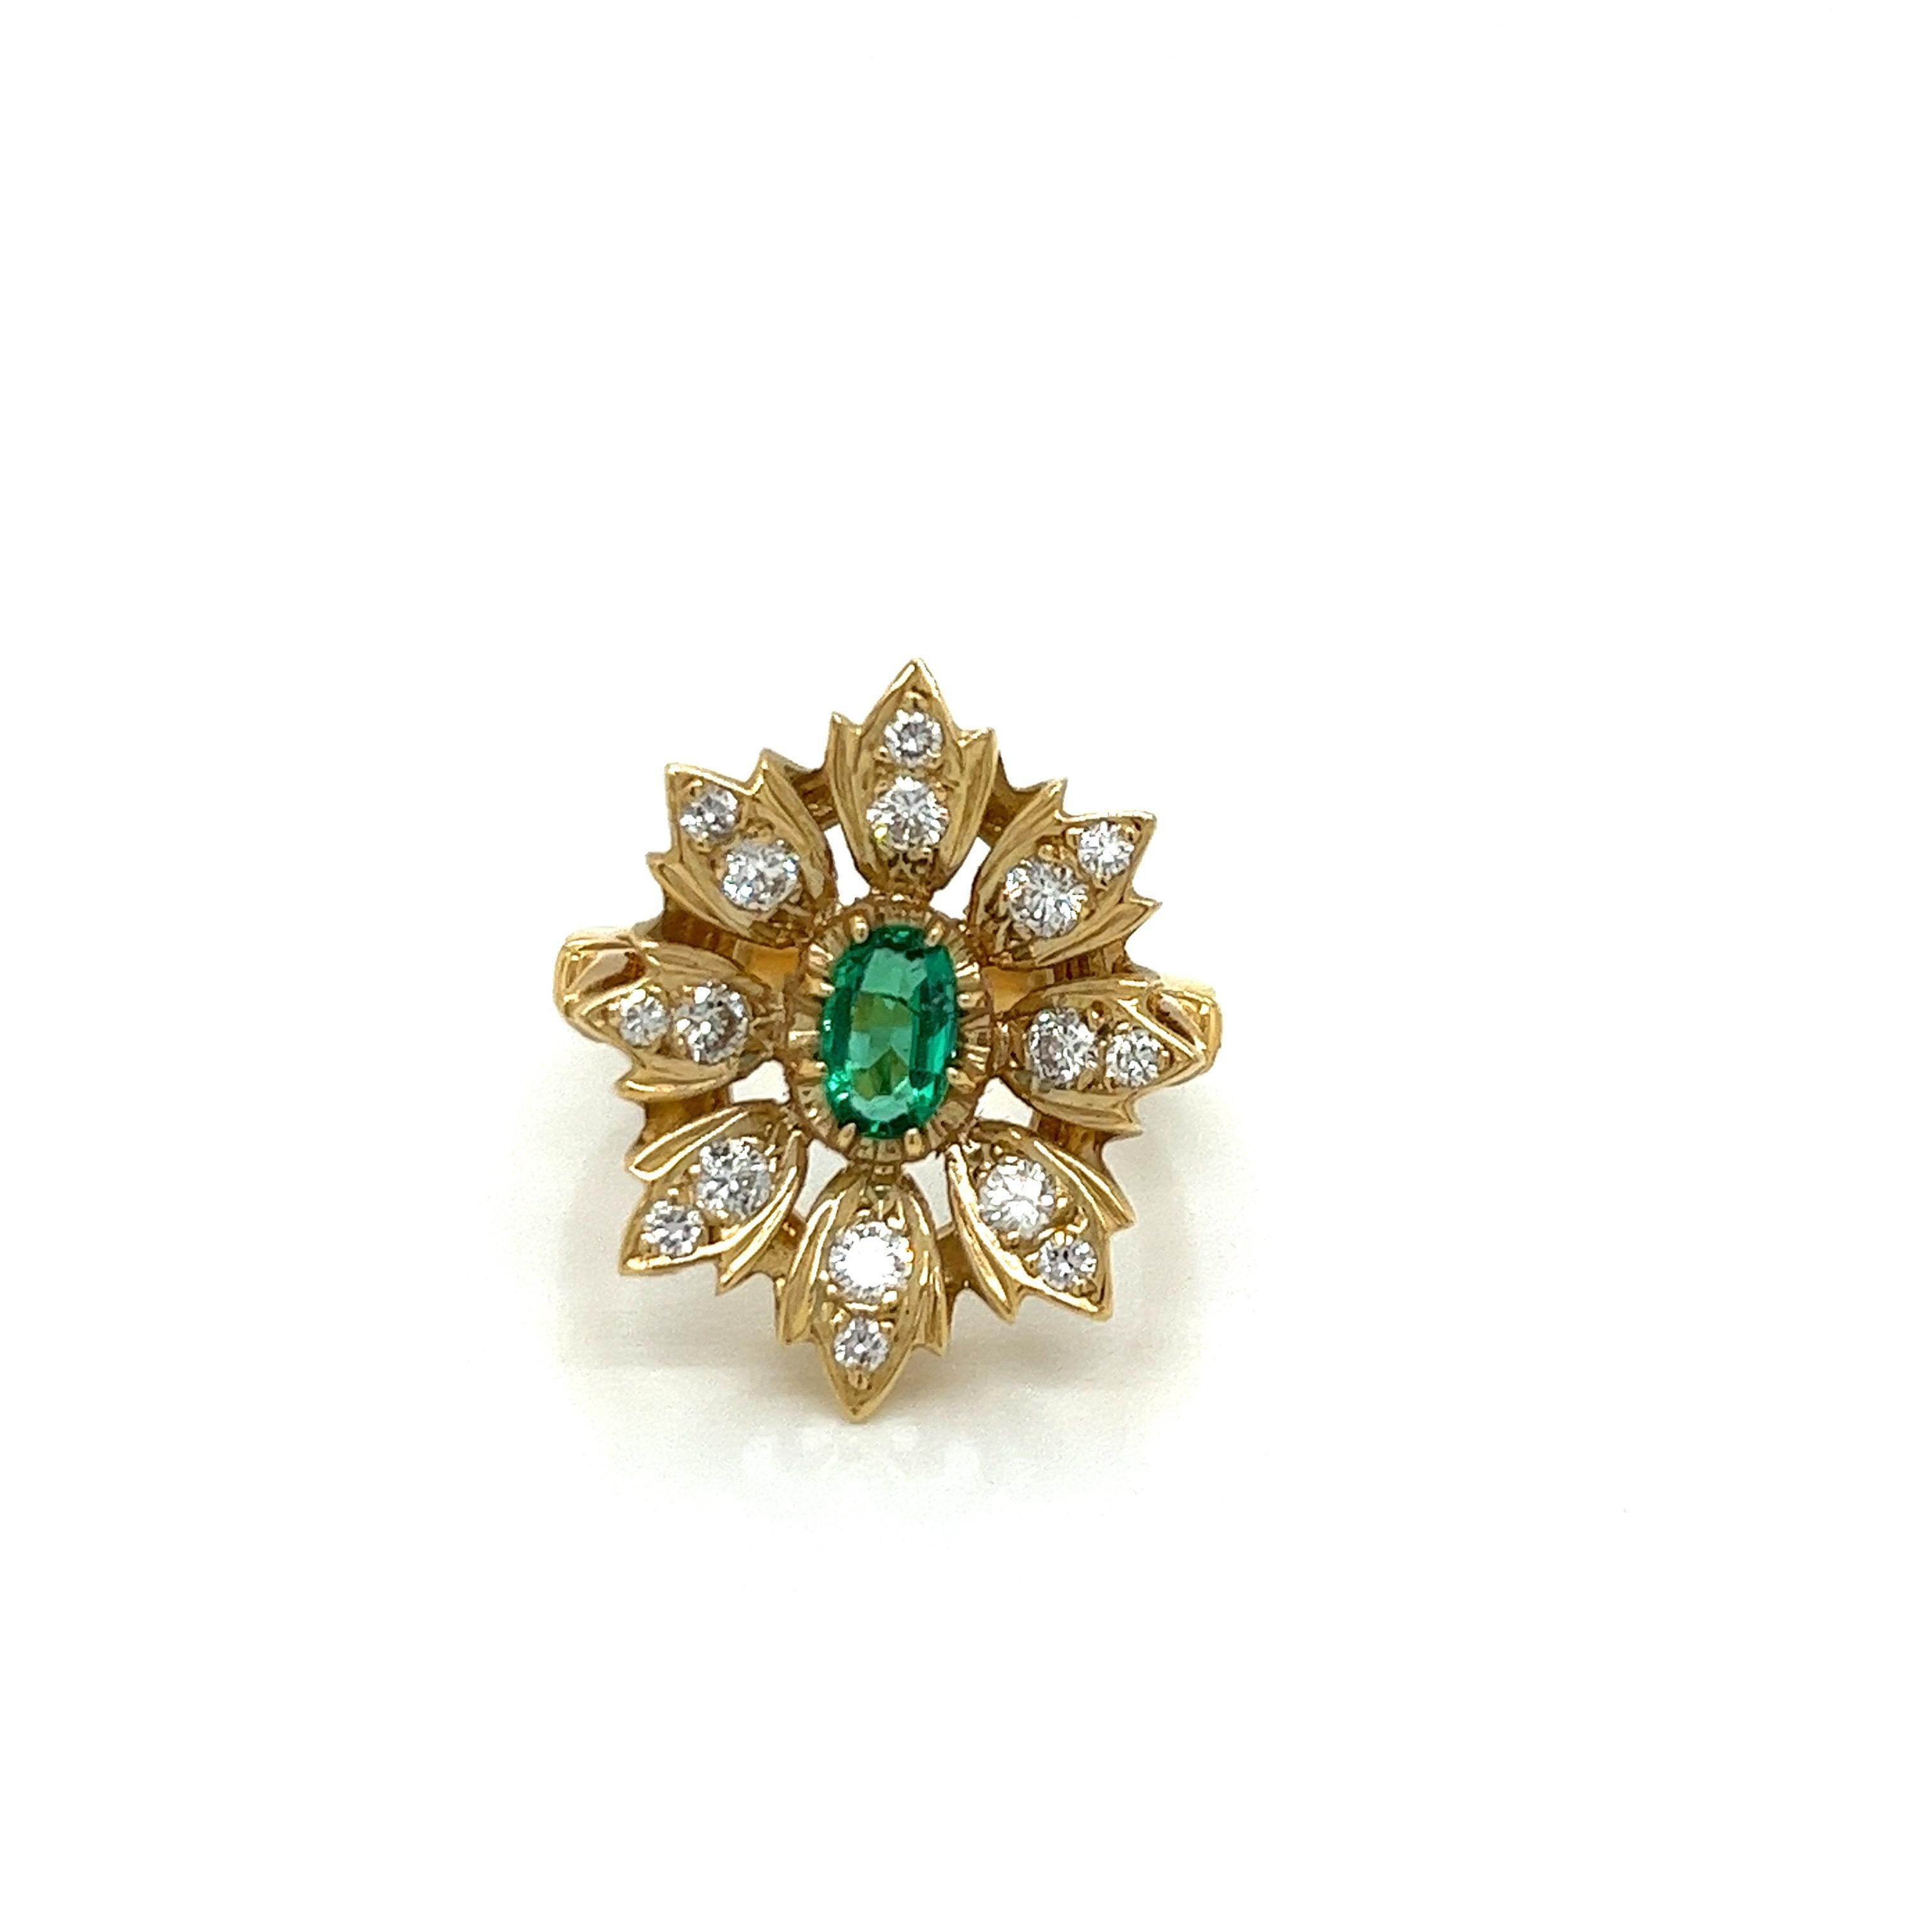 Vintage 14k yellow gold Victorian Reproduction Emerald and Diamond Ring - Manufactured in the 1980's, this Victorian reproduction ring is set with a 6x4mm vivid green emerald weighing approximately .50ct. The surrounding 8 leafs have 2 bright